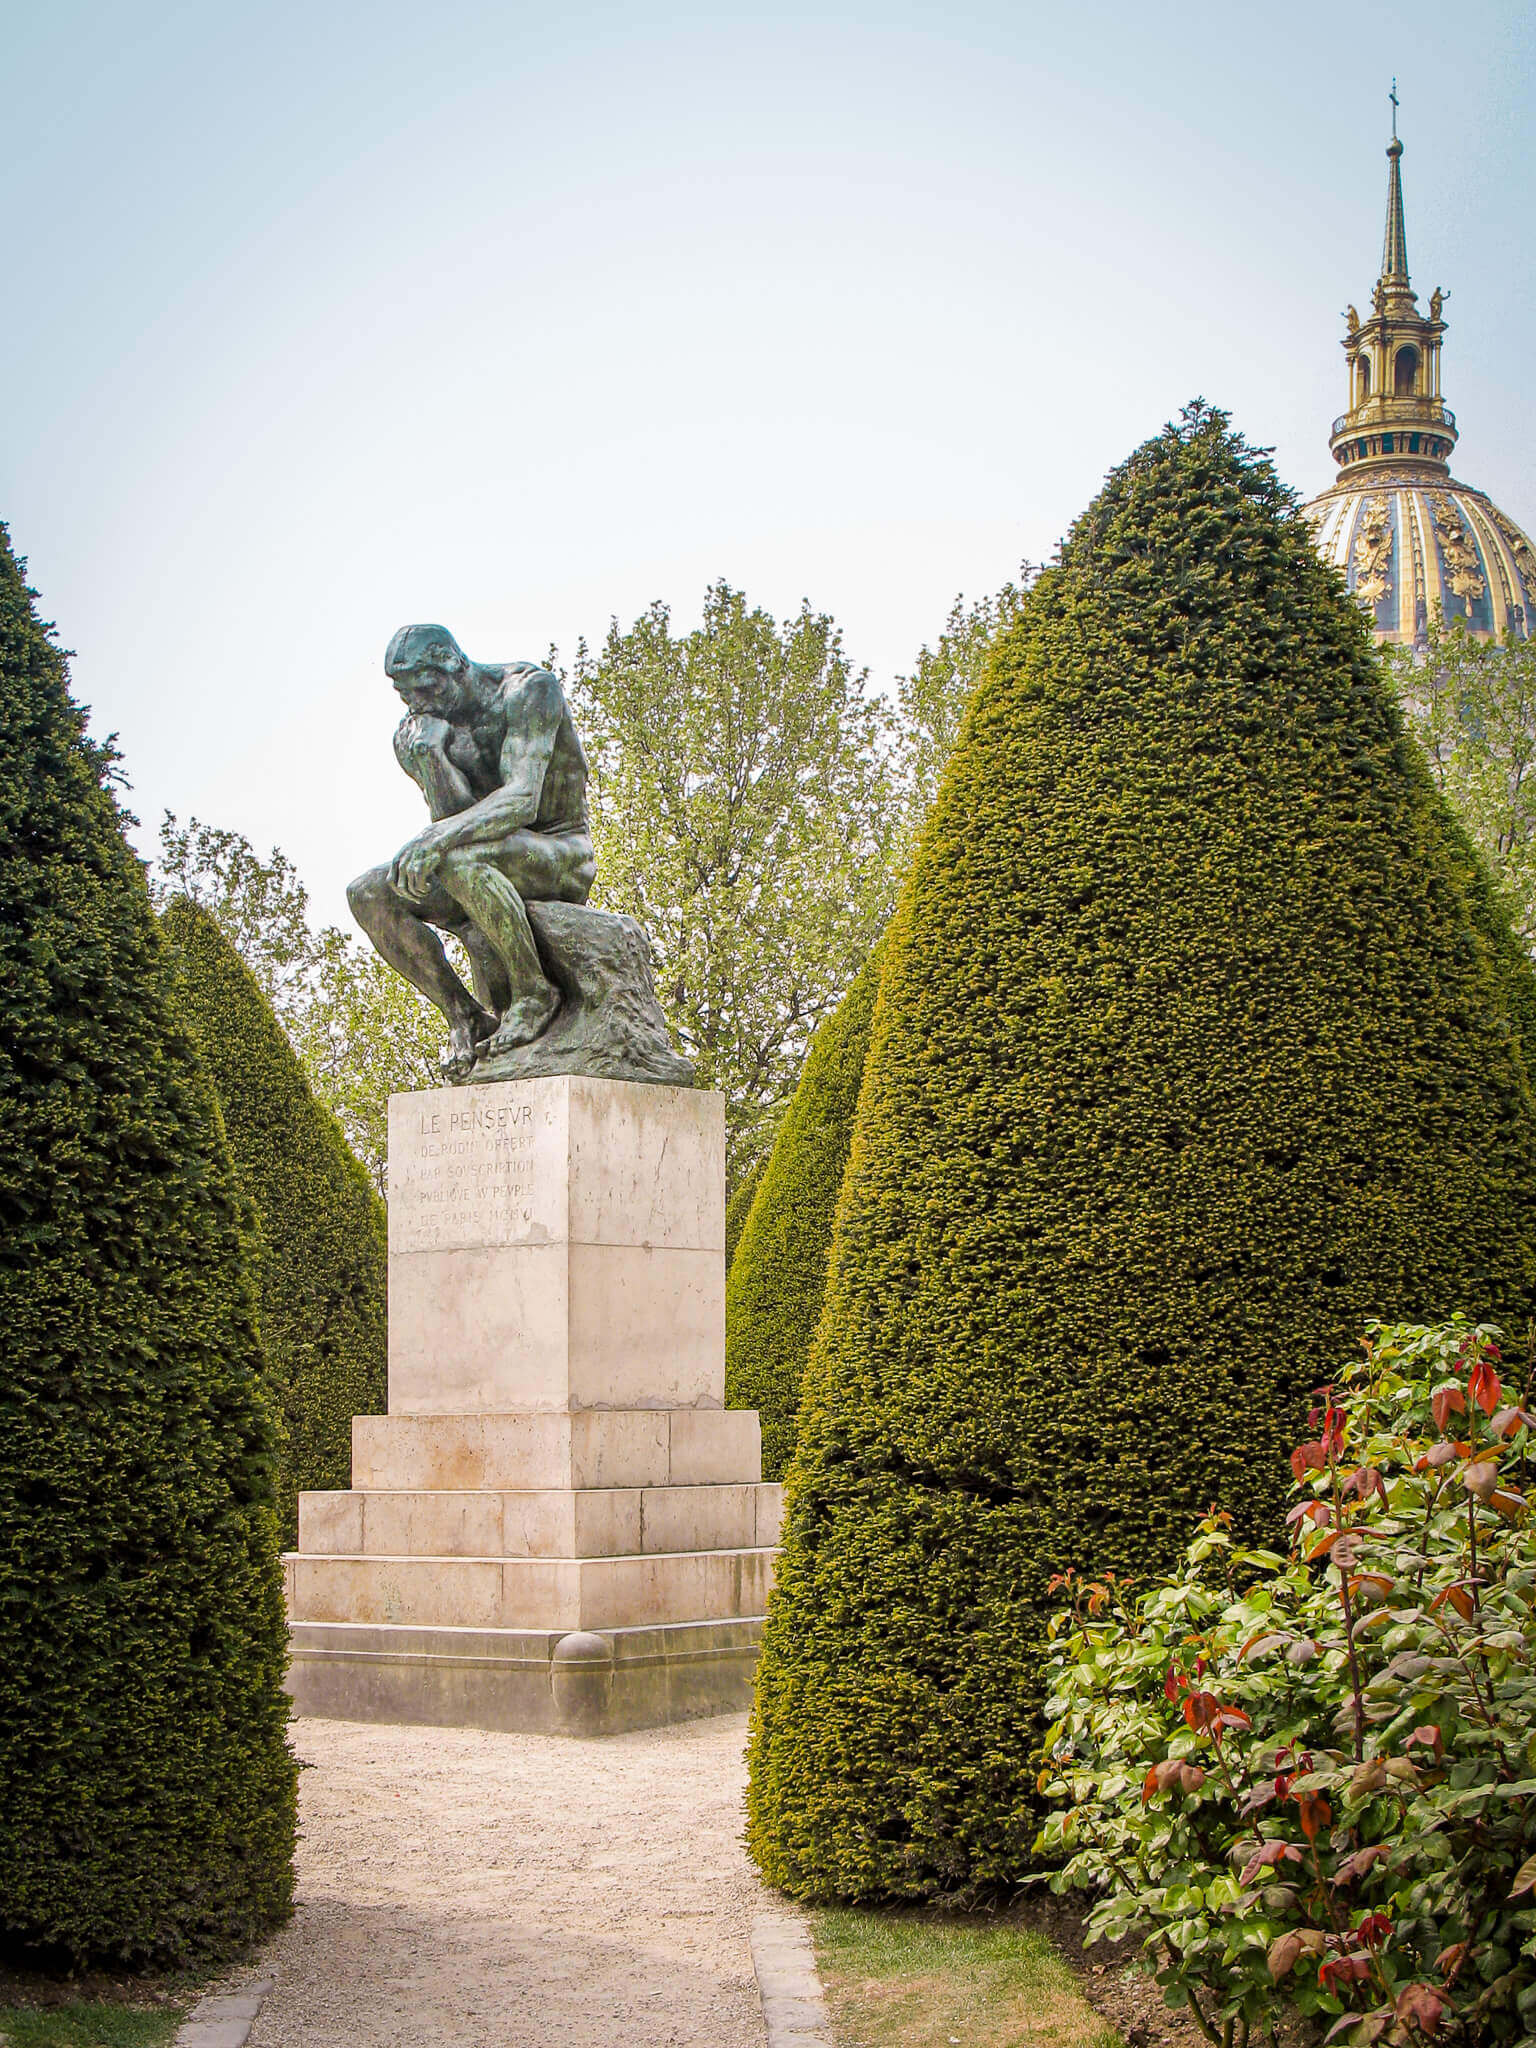 The Thinker sculpture at Musée Rodin with the dome of Les Invalides in the background